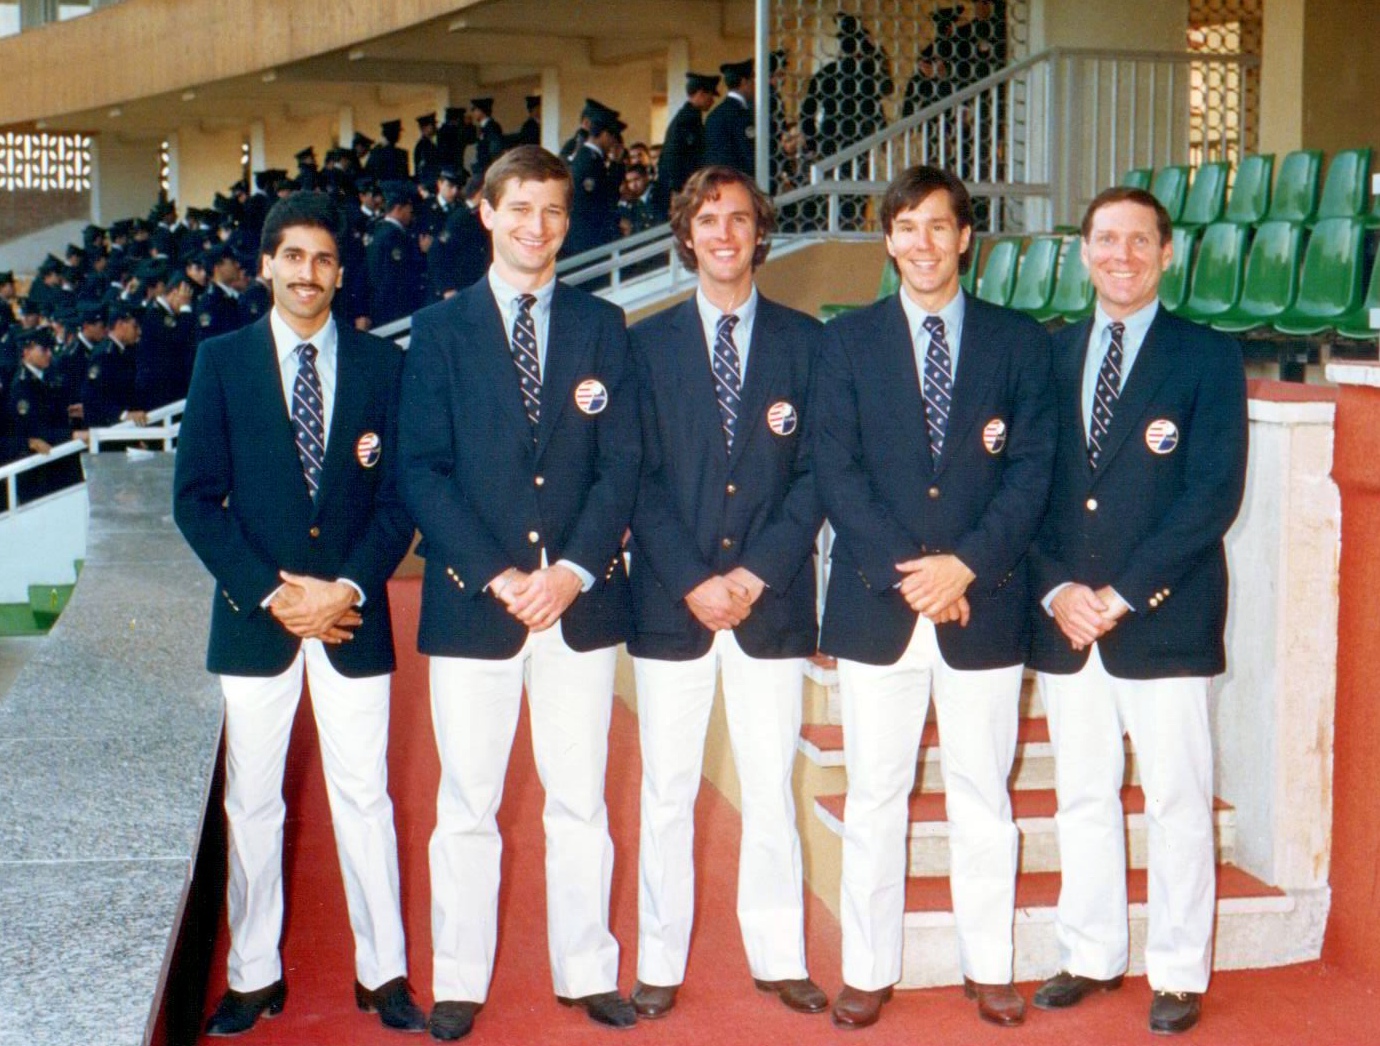 Above is another shot of the U.S. team at the 1985 Worlds with (L-R) Azam Khan, Ned Edwards, Talbott, John Nimick and Jack Herrick.